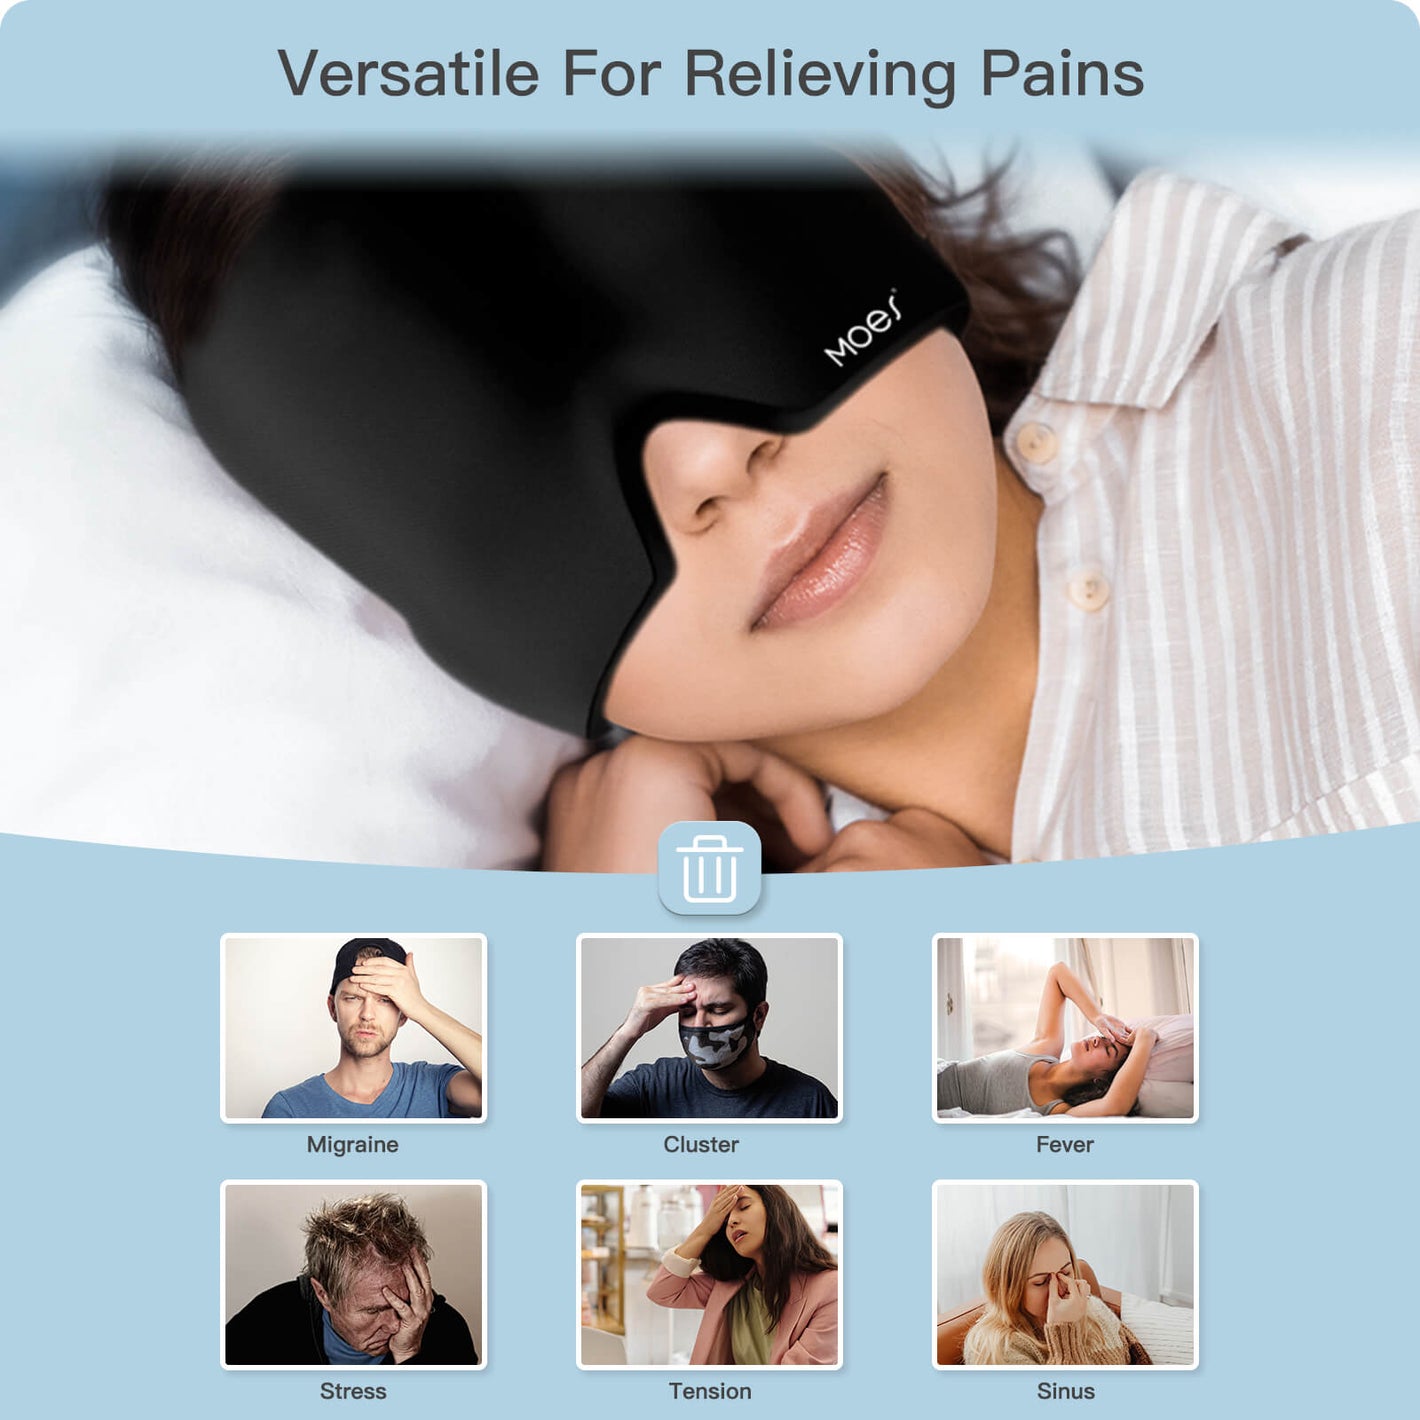 Versatile For Relieving Pains - MOES